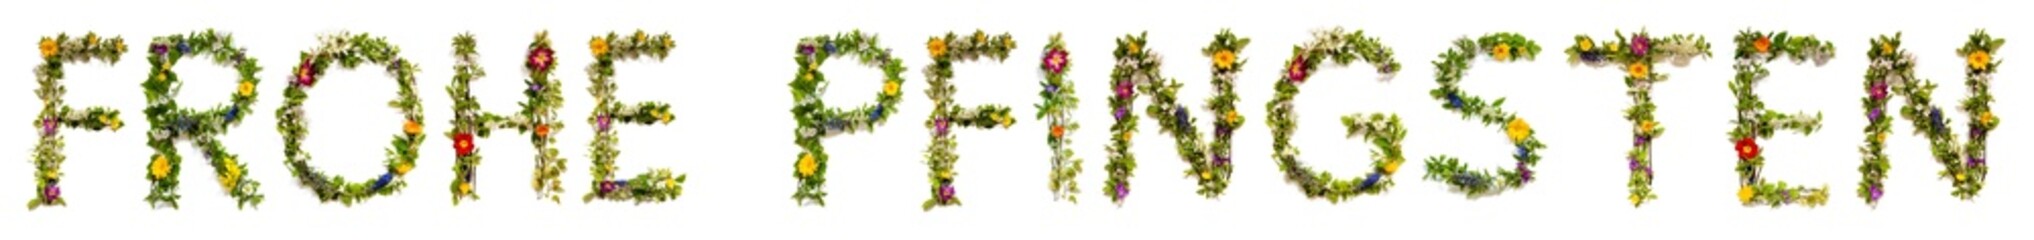 Wall Mural - Colorful Blooming Flower Letters Building Frohe Pfingsten Means Happy Pentecost